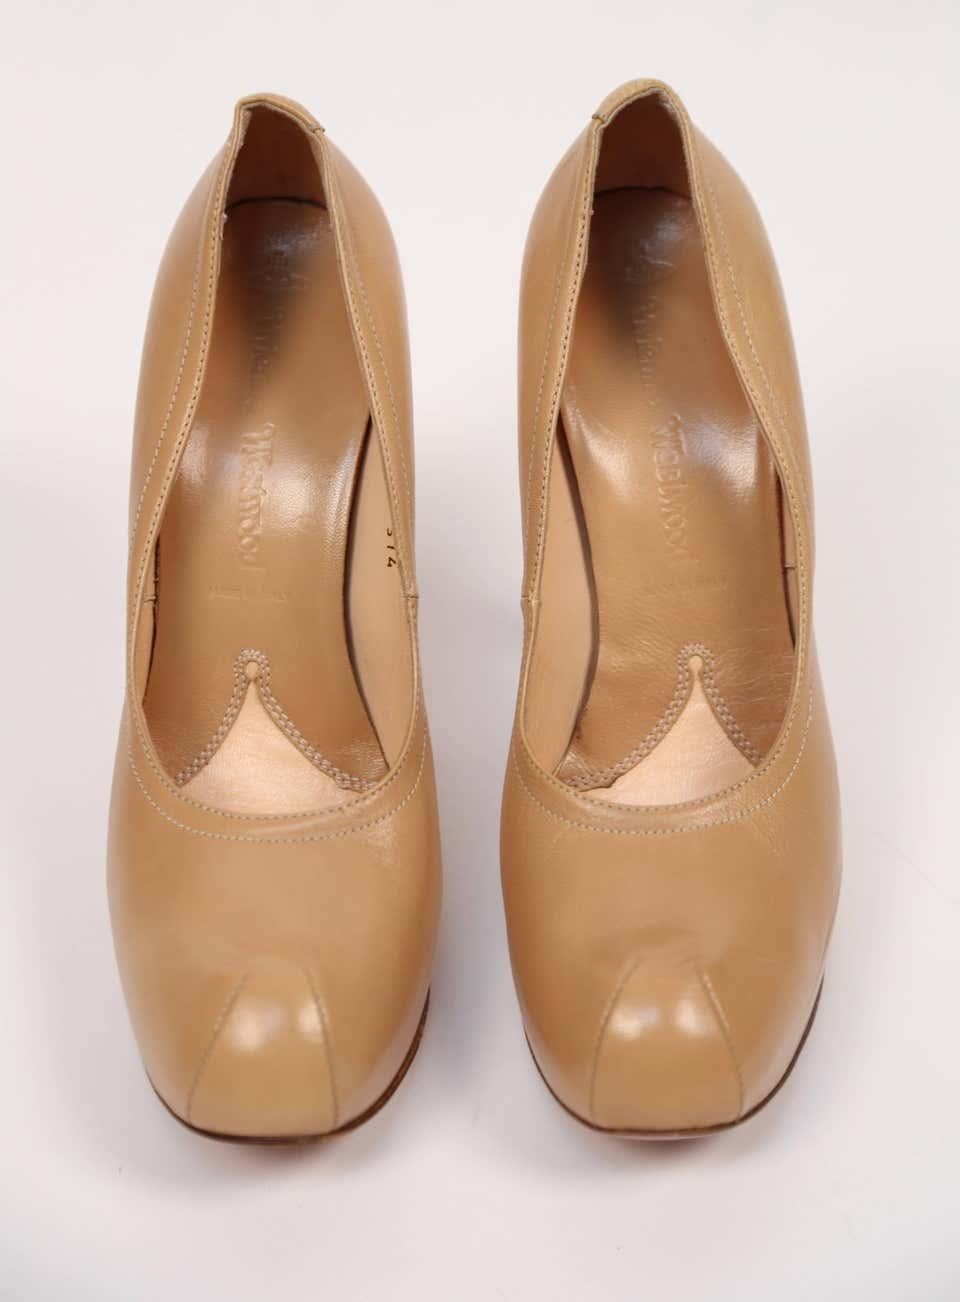 Towering tan leather platform heels from Vivienne Westwood dating to the early 2000's. European size 41. Approximate measurements: insoles just over 10.75